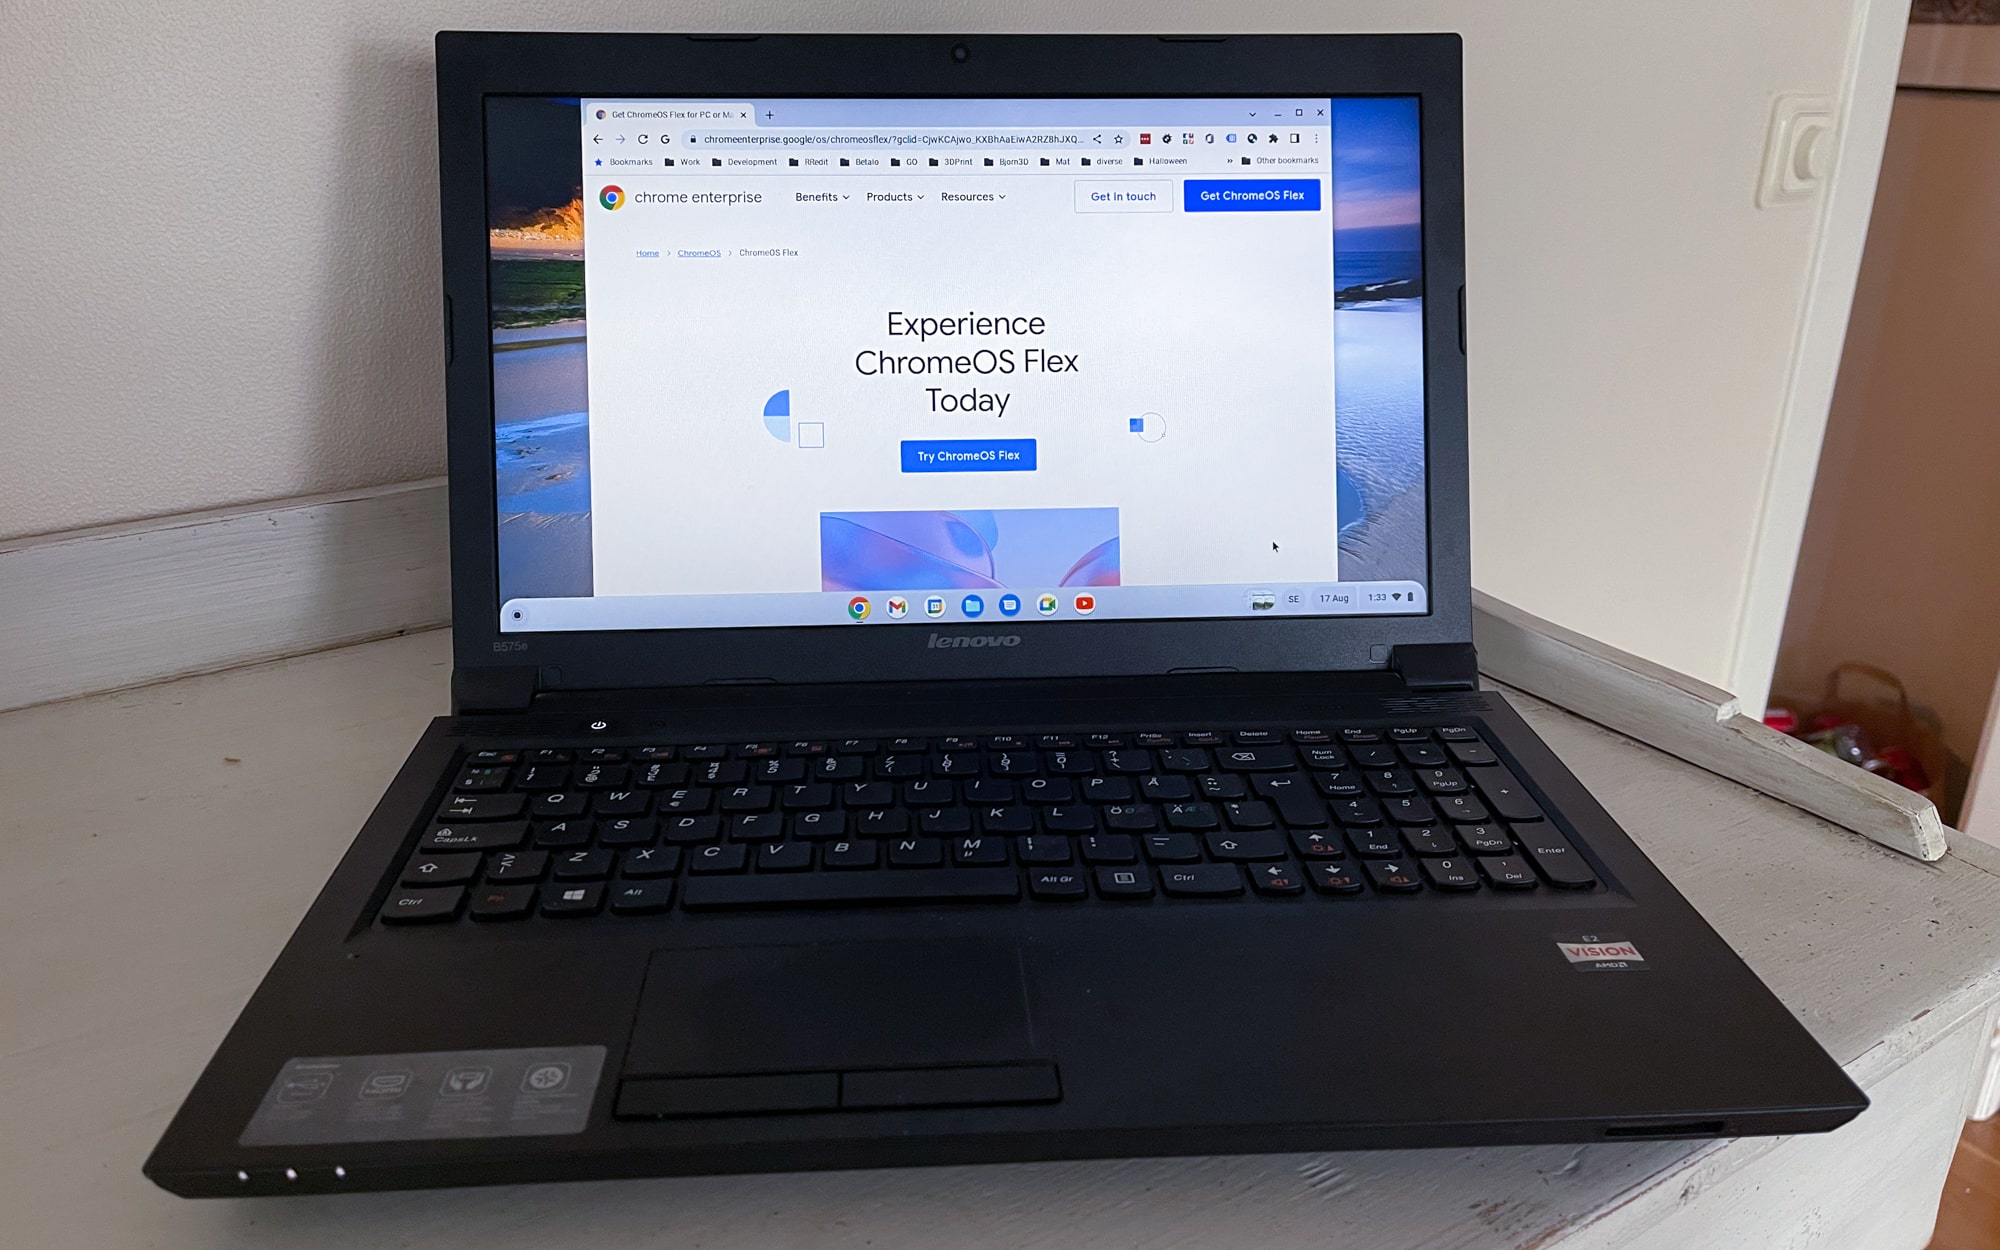 We installed ChromeOS Flex on an old laptop — with impressive results